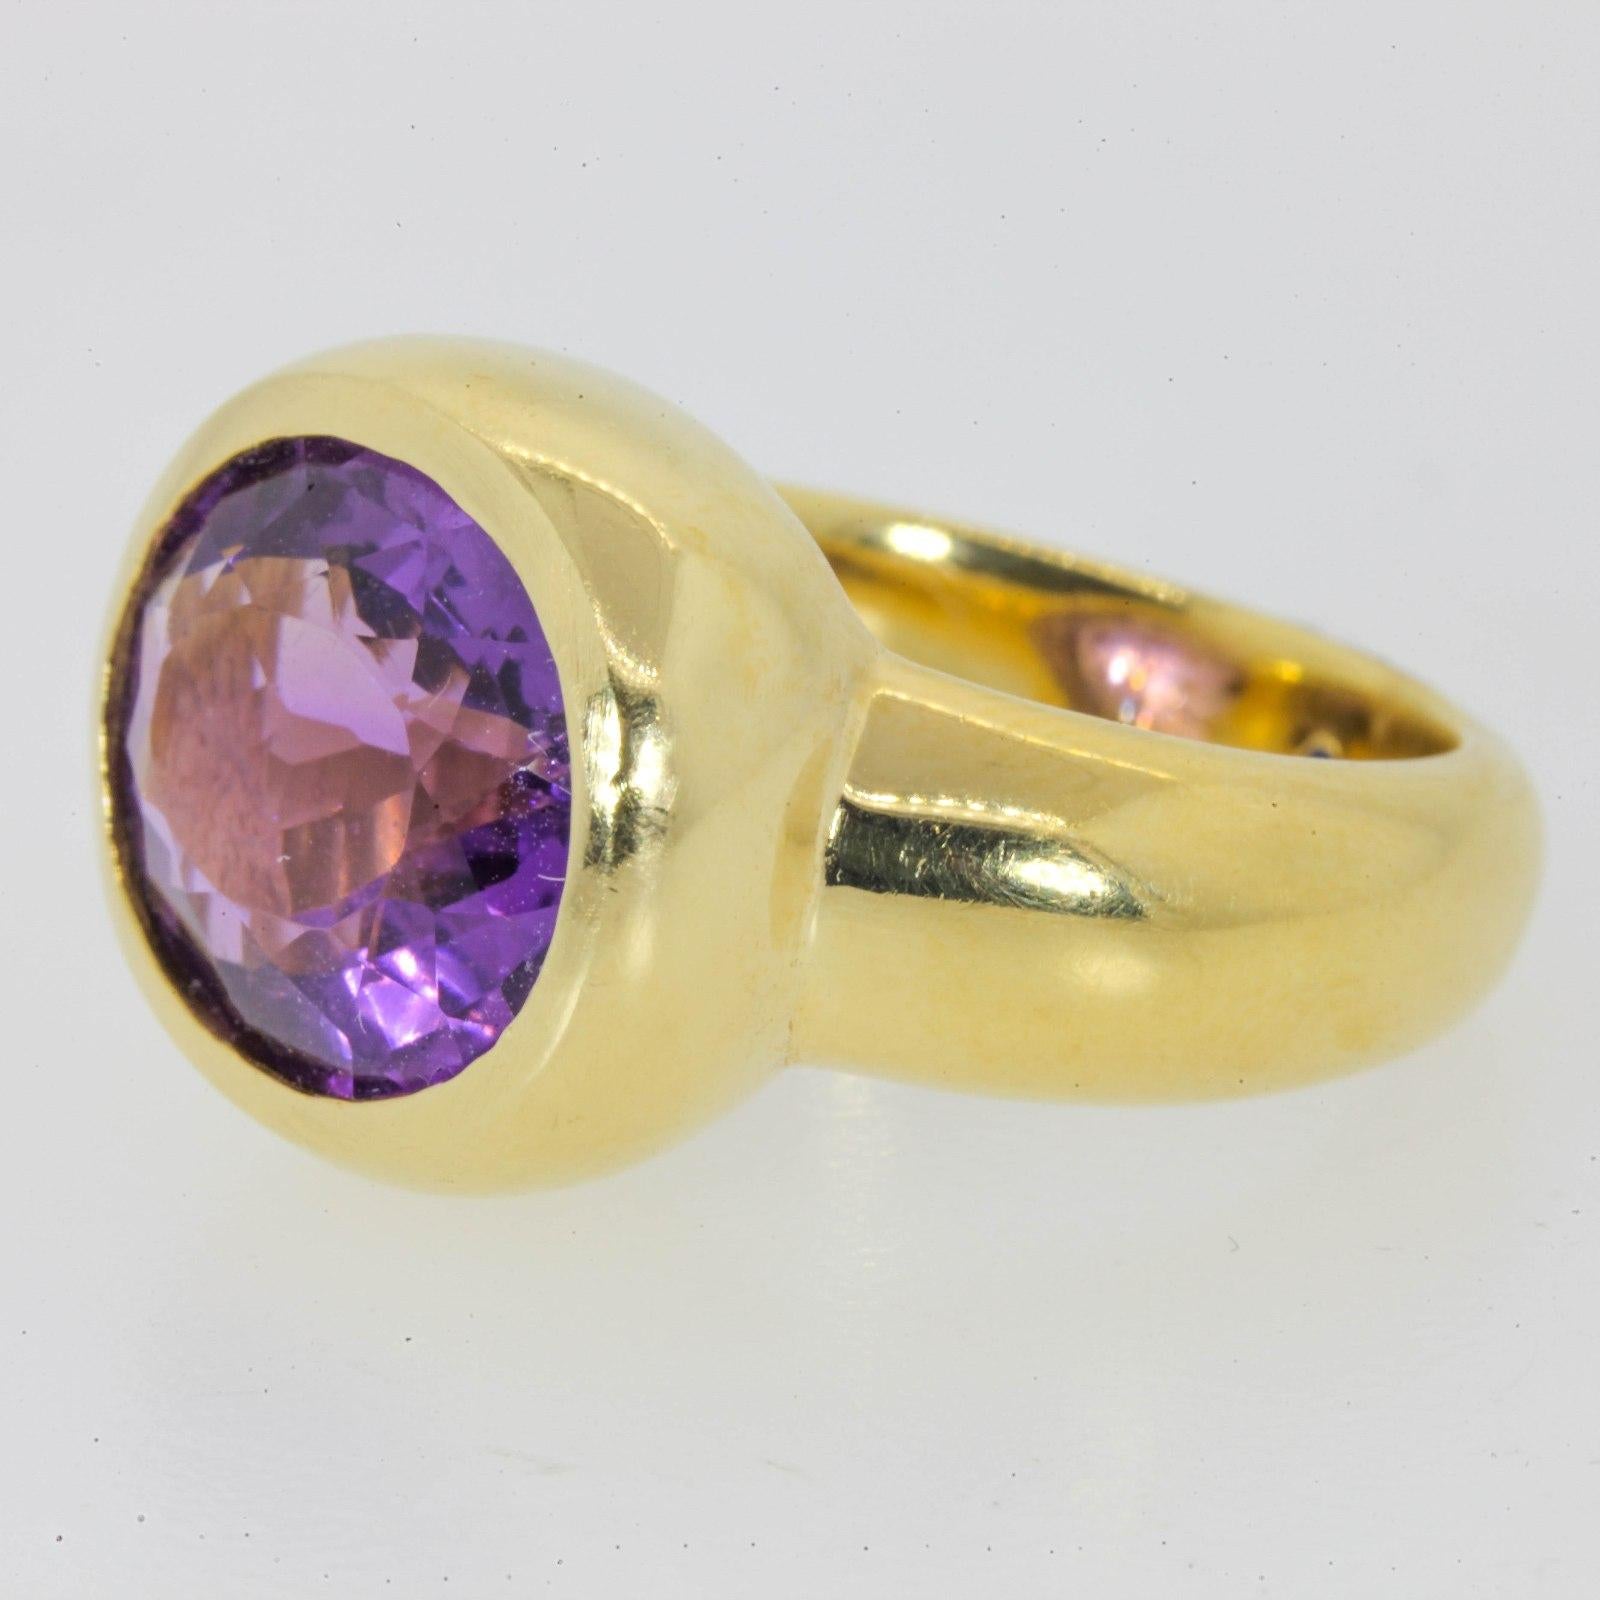 Luminous & Fashionable!  A contemporary 18KT yellow gold ring featuring a large oval cut bezel set Amethyst.  The tapered band is accented on the outside with a 0.01 carat blue Sapphire.  The ring is size 6 3/4.  